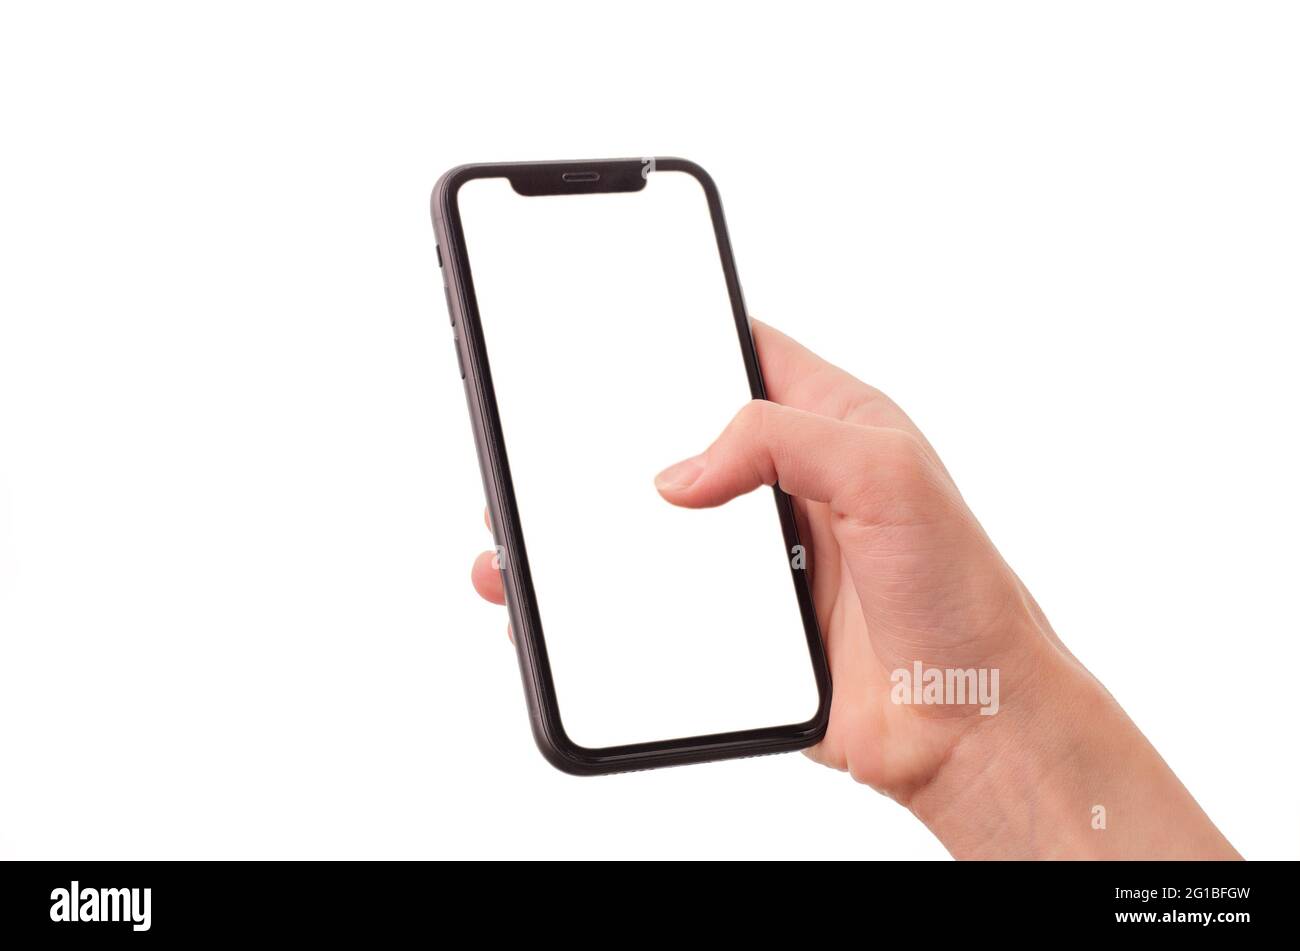 Mockup Image Of Smartphone With Blank Screen In Girl's Hand Isolated On White. Copy Space Stock Photo